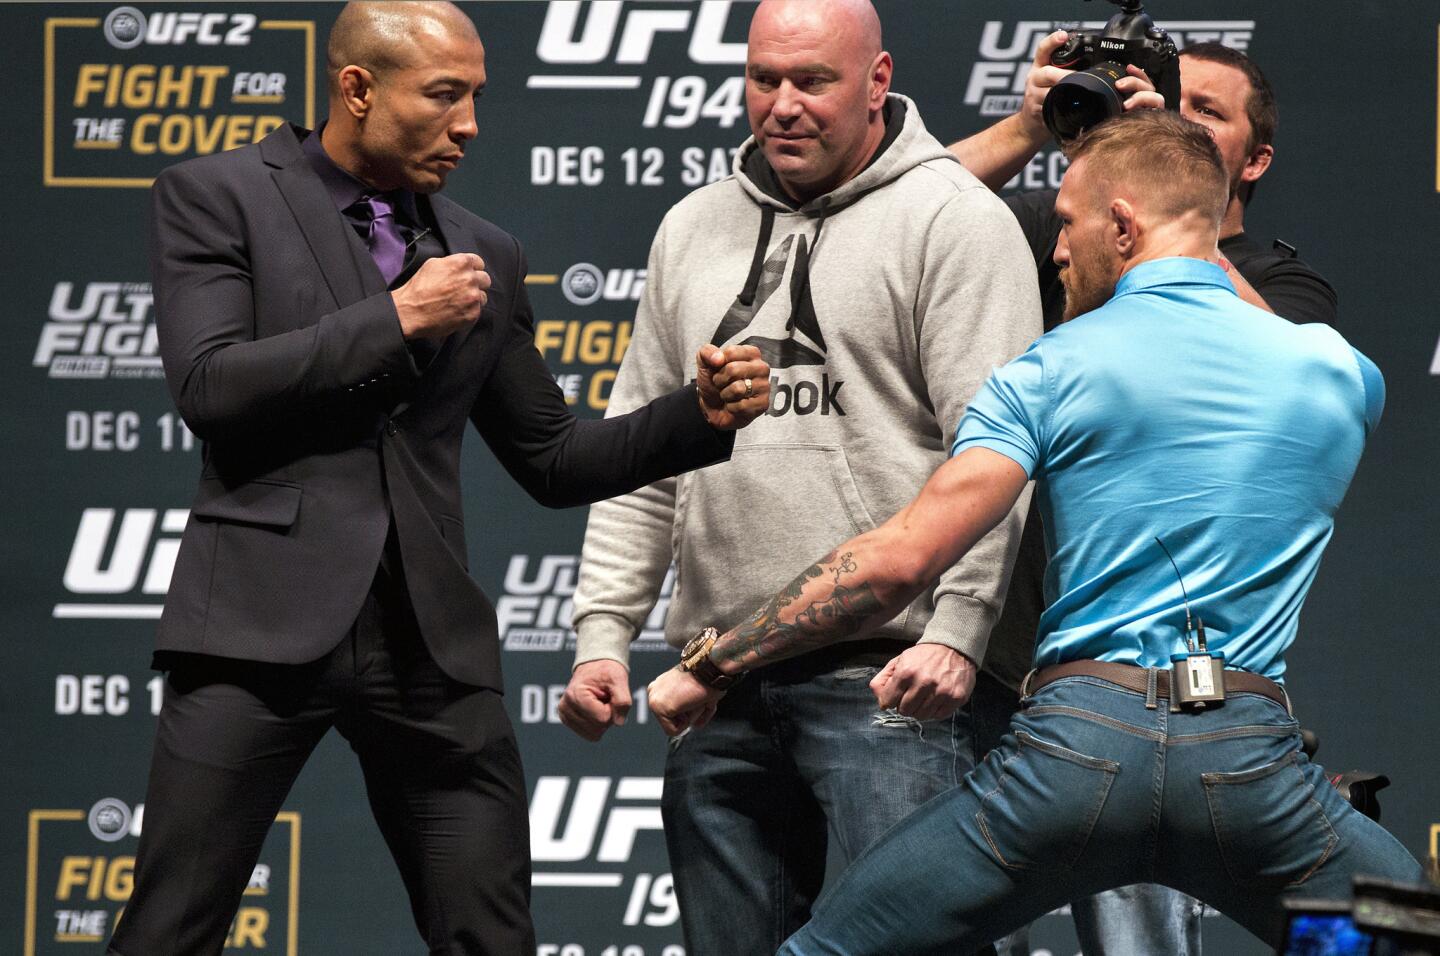 UFC featherweight champion Jose Aldo, left, poses for a photo with his opponent interim UFC featherweight champion Conor McGregor, right, during a UFC 194 news conference at the MGM Grand Garden Arena in Las Vegas, Wednesday, Dec. 9, 2015. (L.E. Baskow/Las Vegas Sun via AP) LAS VEGAS REVIEW-JOURNAL OUT; MANDATORY CREDIT